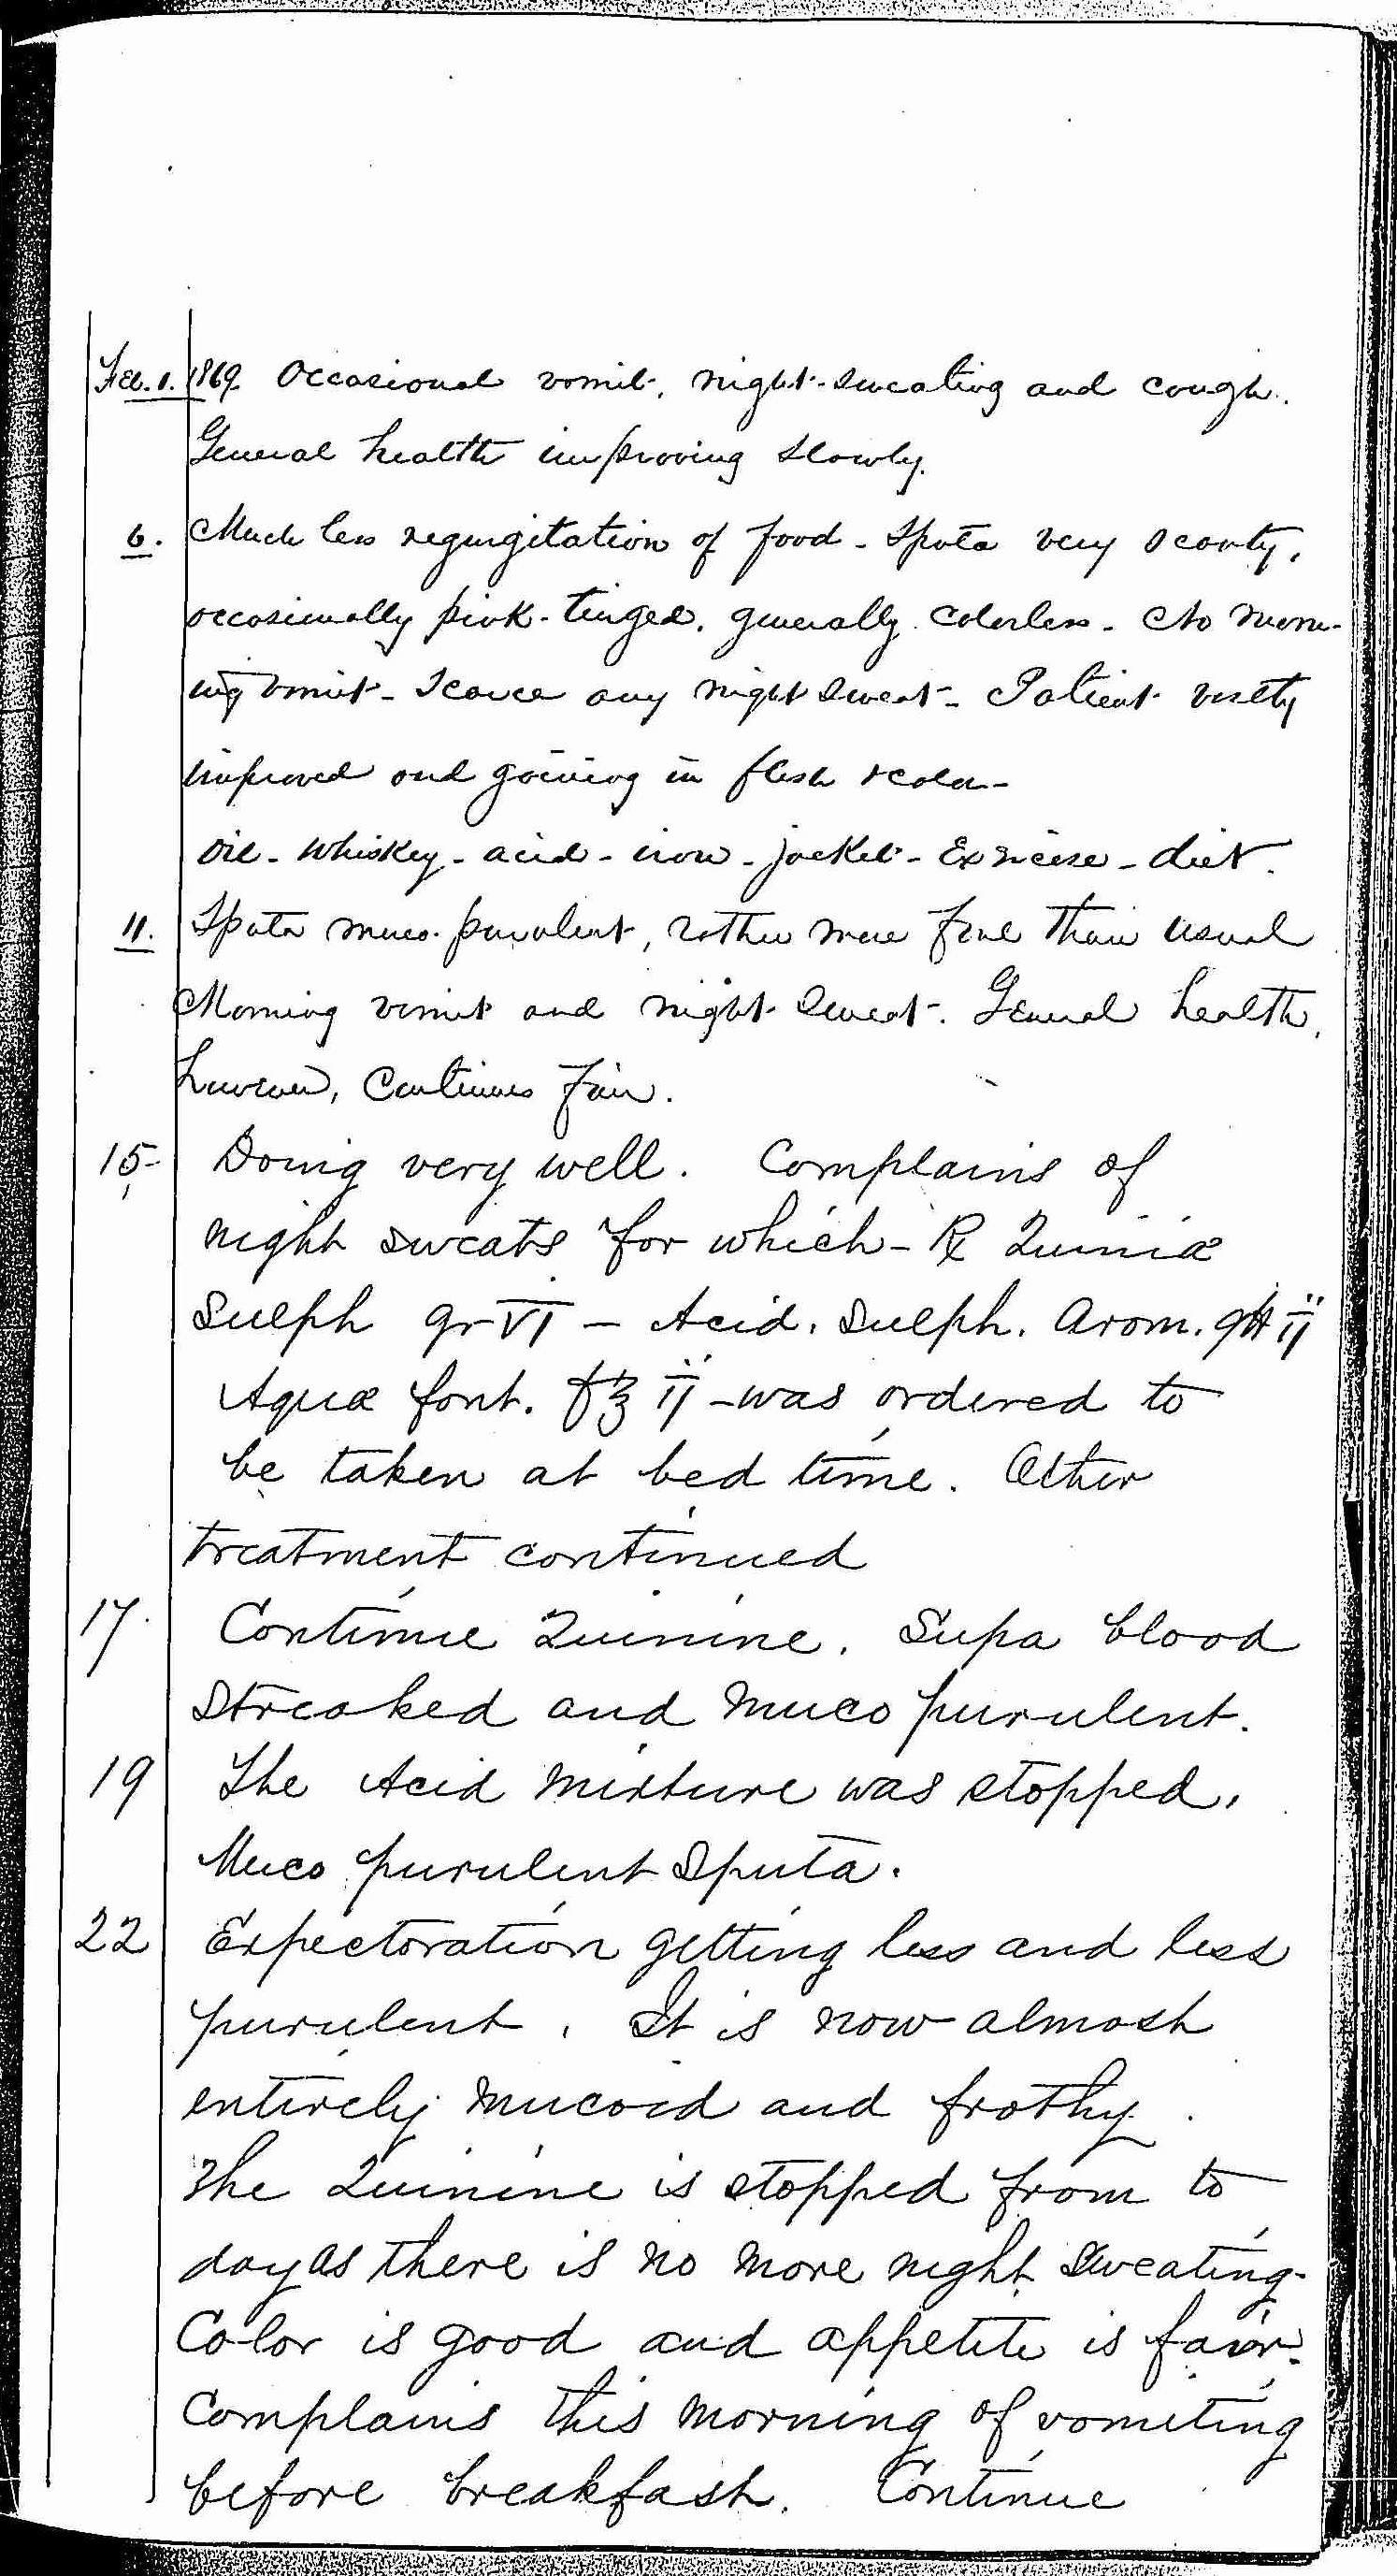 Entry for Hugh Riley (page 23 of 31) in the log Hospital Tickets and Case Papers - Naval Hospital - Washington, D.C. - 1868-69